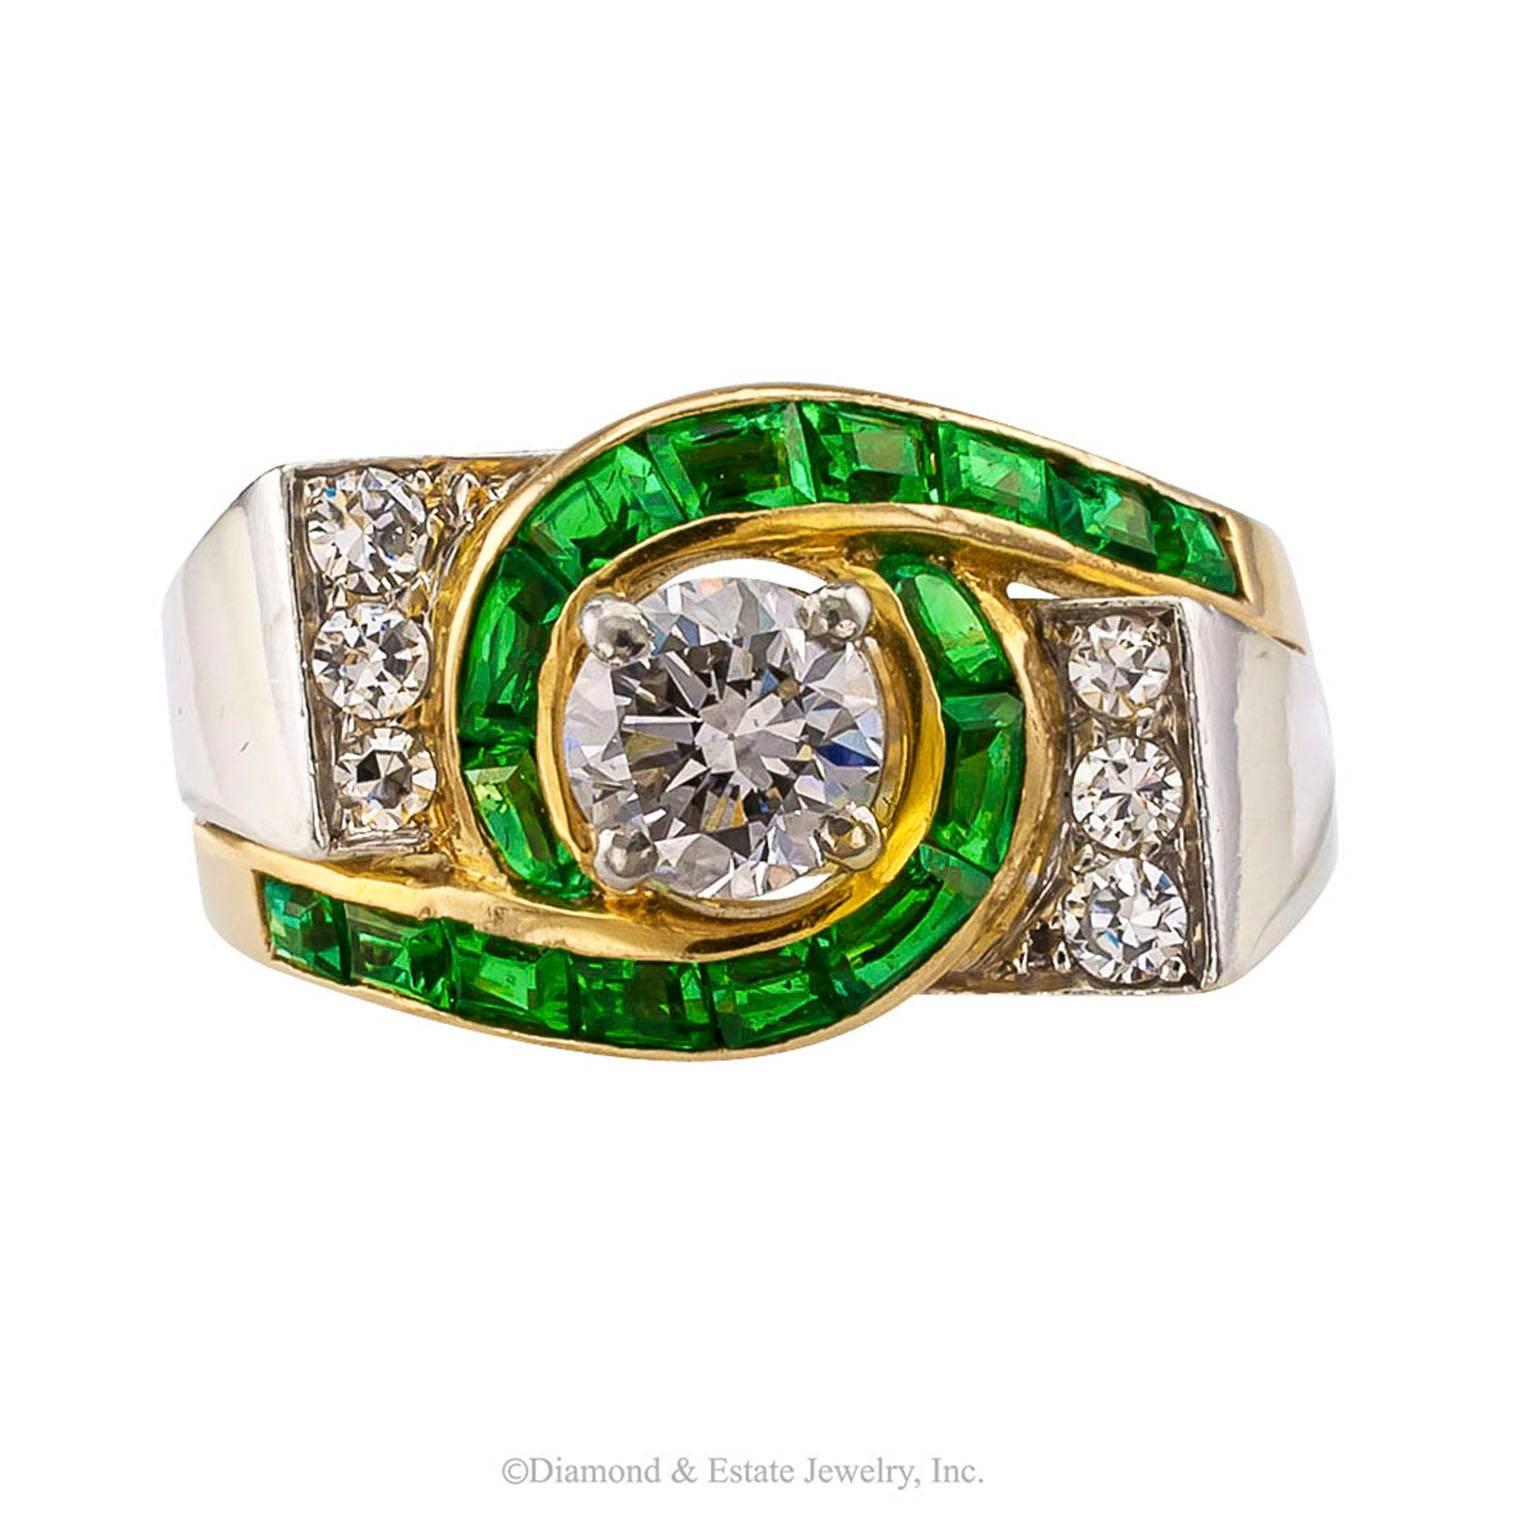 Modernist 1950s Emerald Diamond Gold Platinum Ring

Modernist 1950s emerald and diamond ring crafted in 18-karat gold and platinum.  The design features a round diamond weighing approximately 0.60 carat, approximately H color and VS - SI clarity,